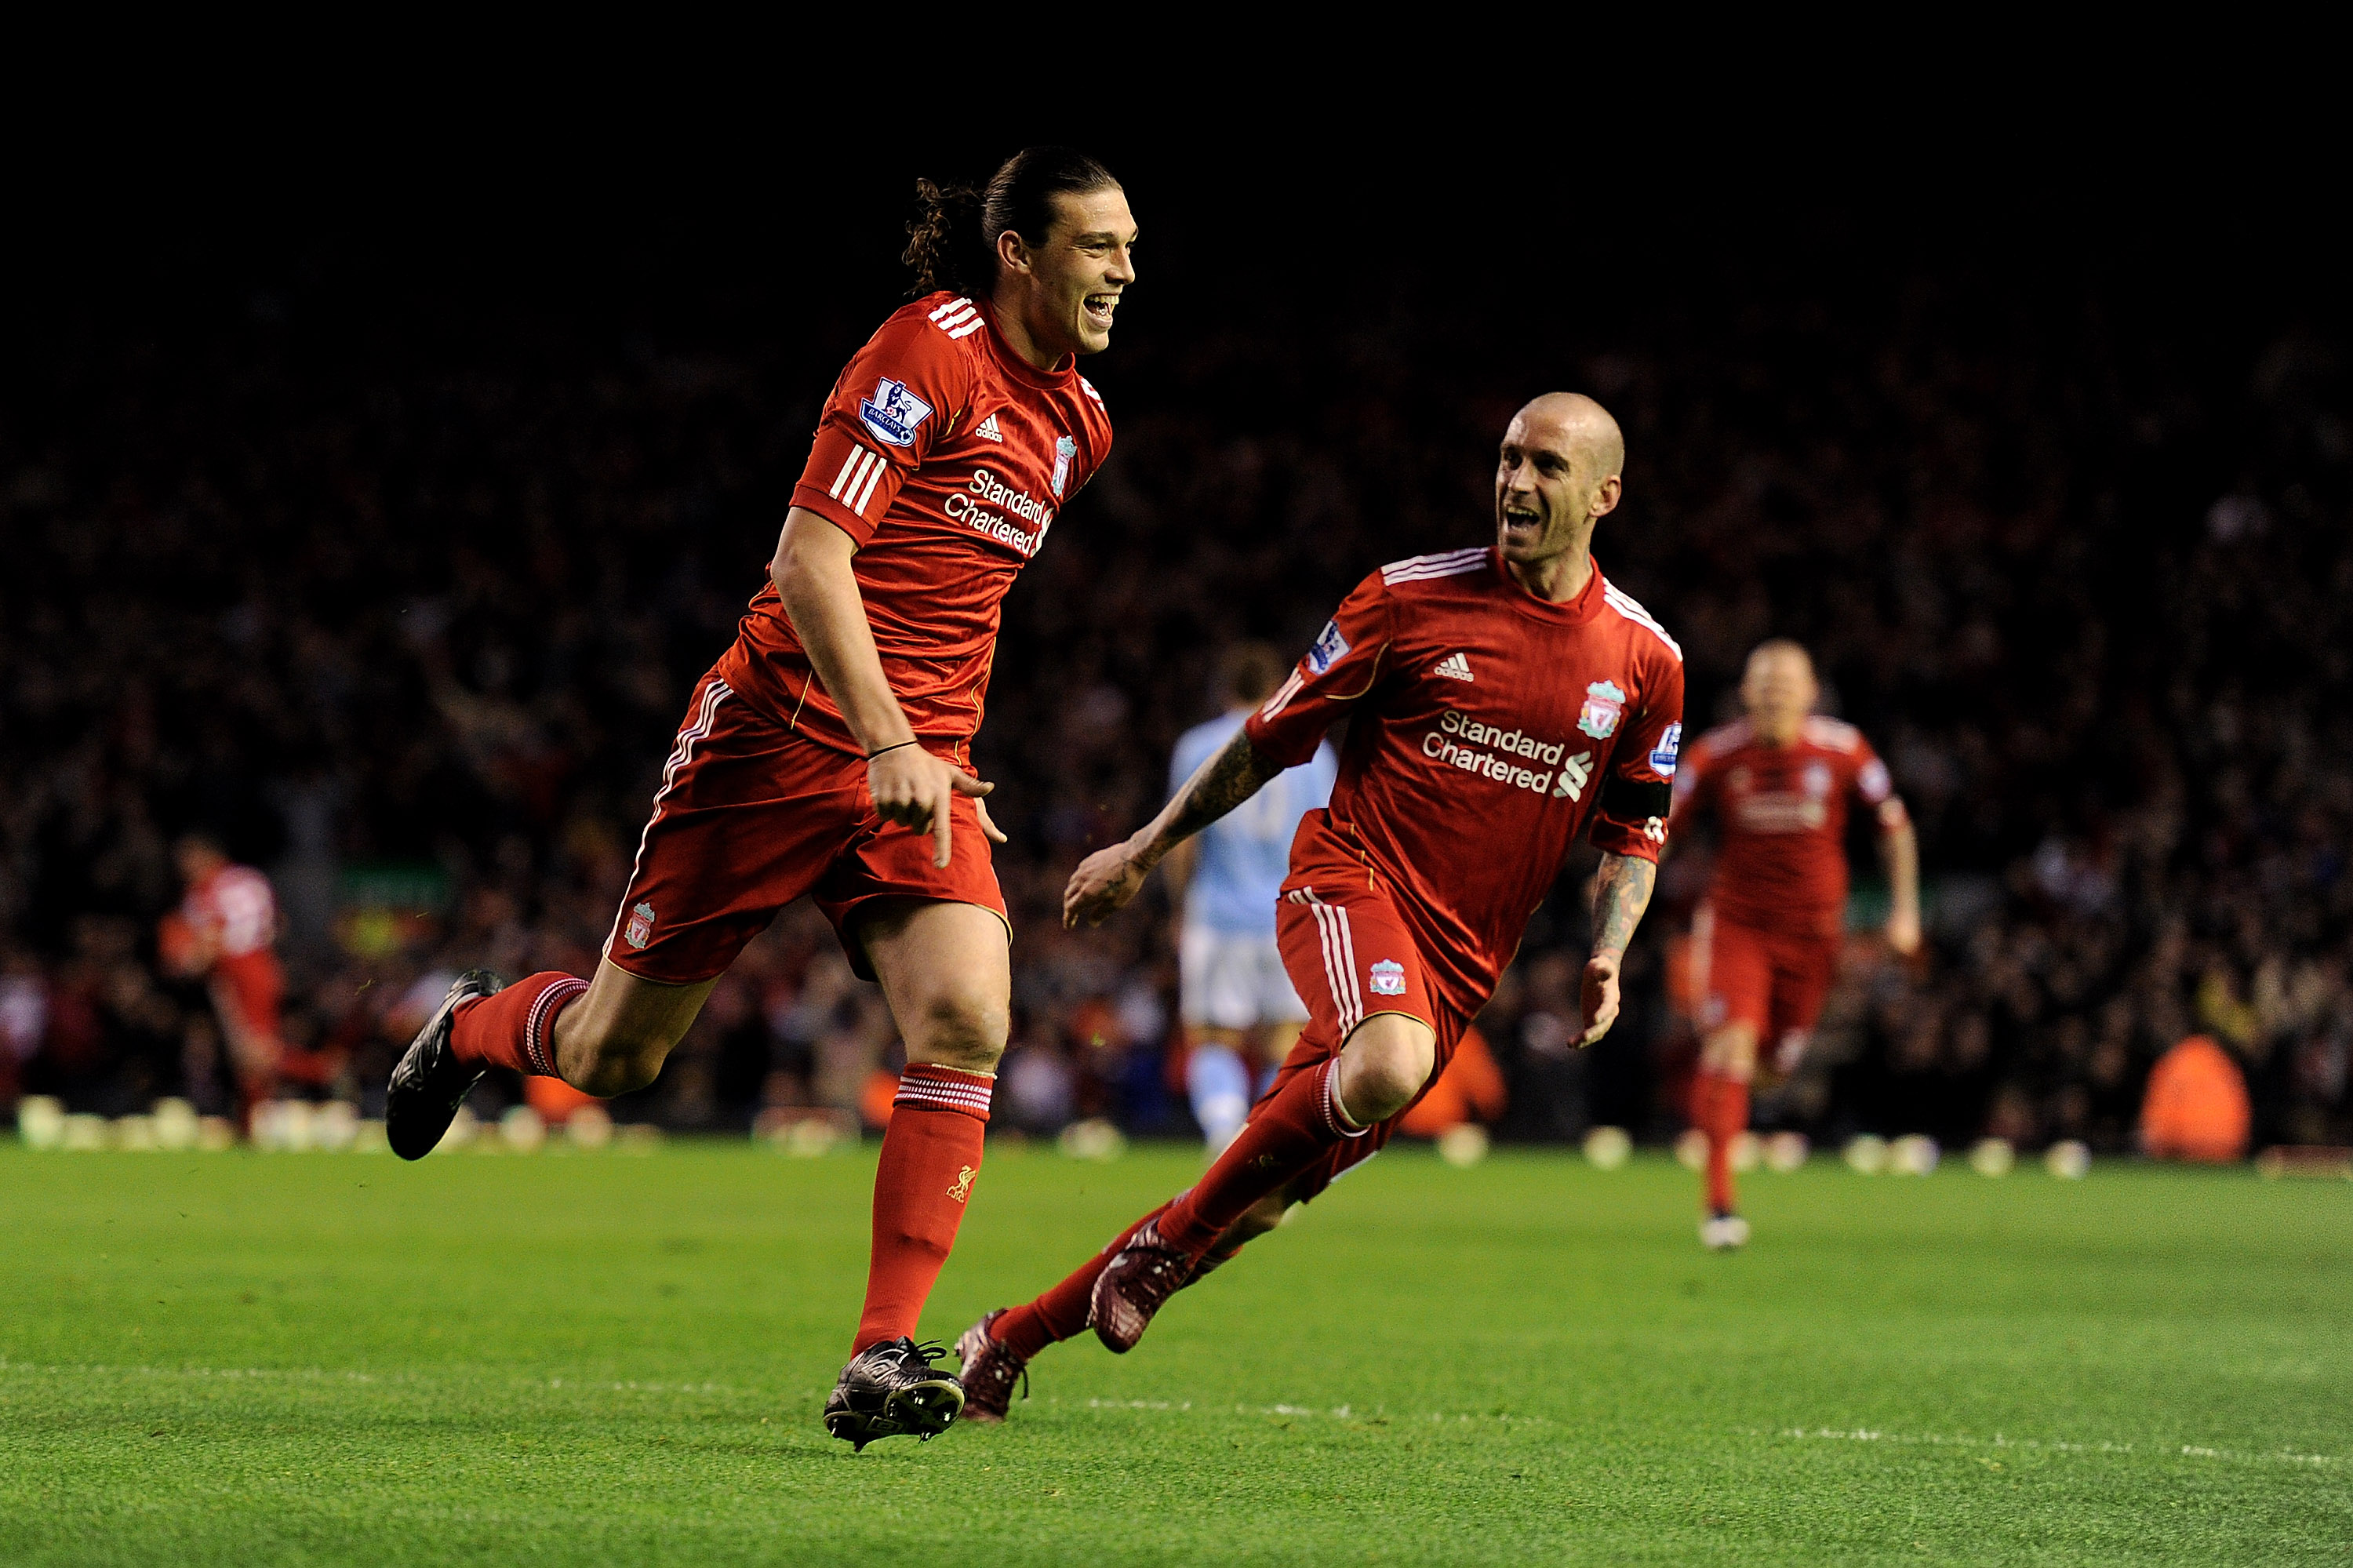 LIVERPOOL, ENGLAND - APRIL 11:  Andy Carroll of Liverpool celebrates scoring the opening goal with team mate Raul Meireles (R) during the Barclays Premier League match between Liverpool and Manchester City at Anfield on April 11, 2011 in Liverpool, Englan